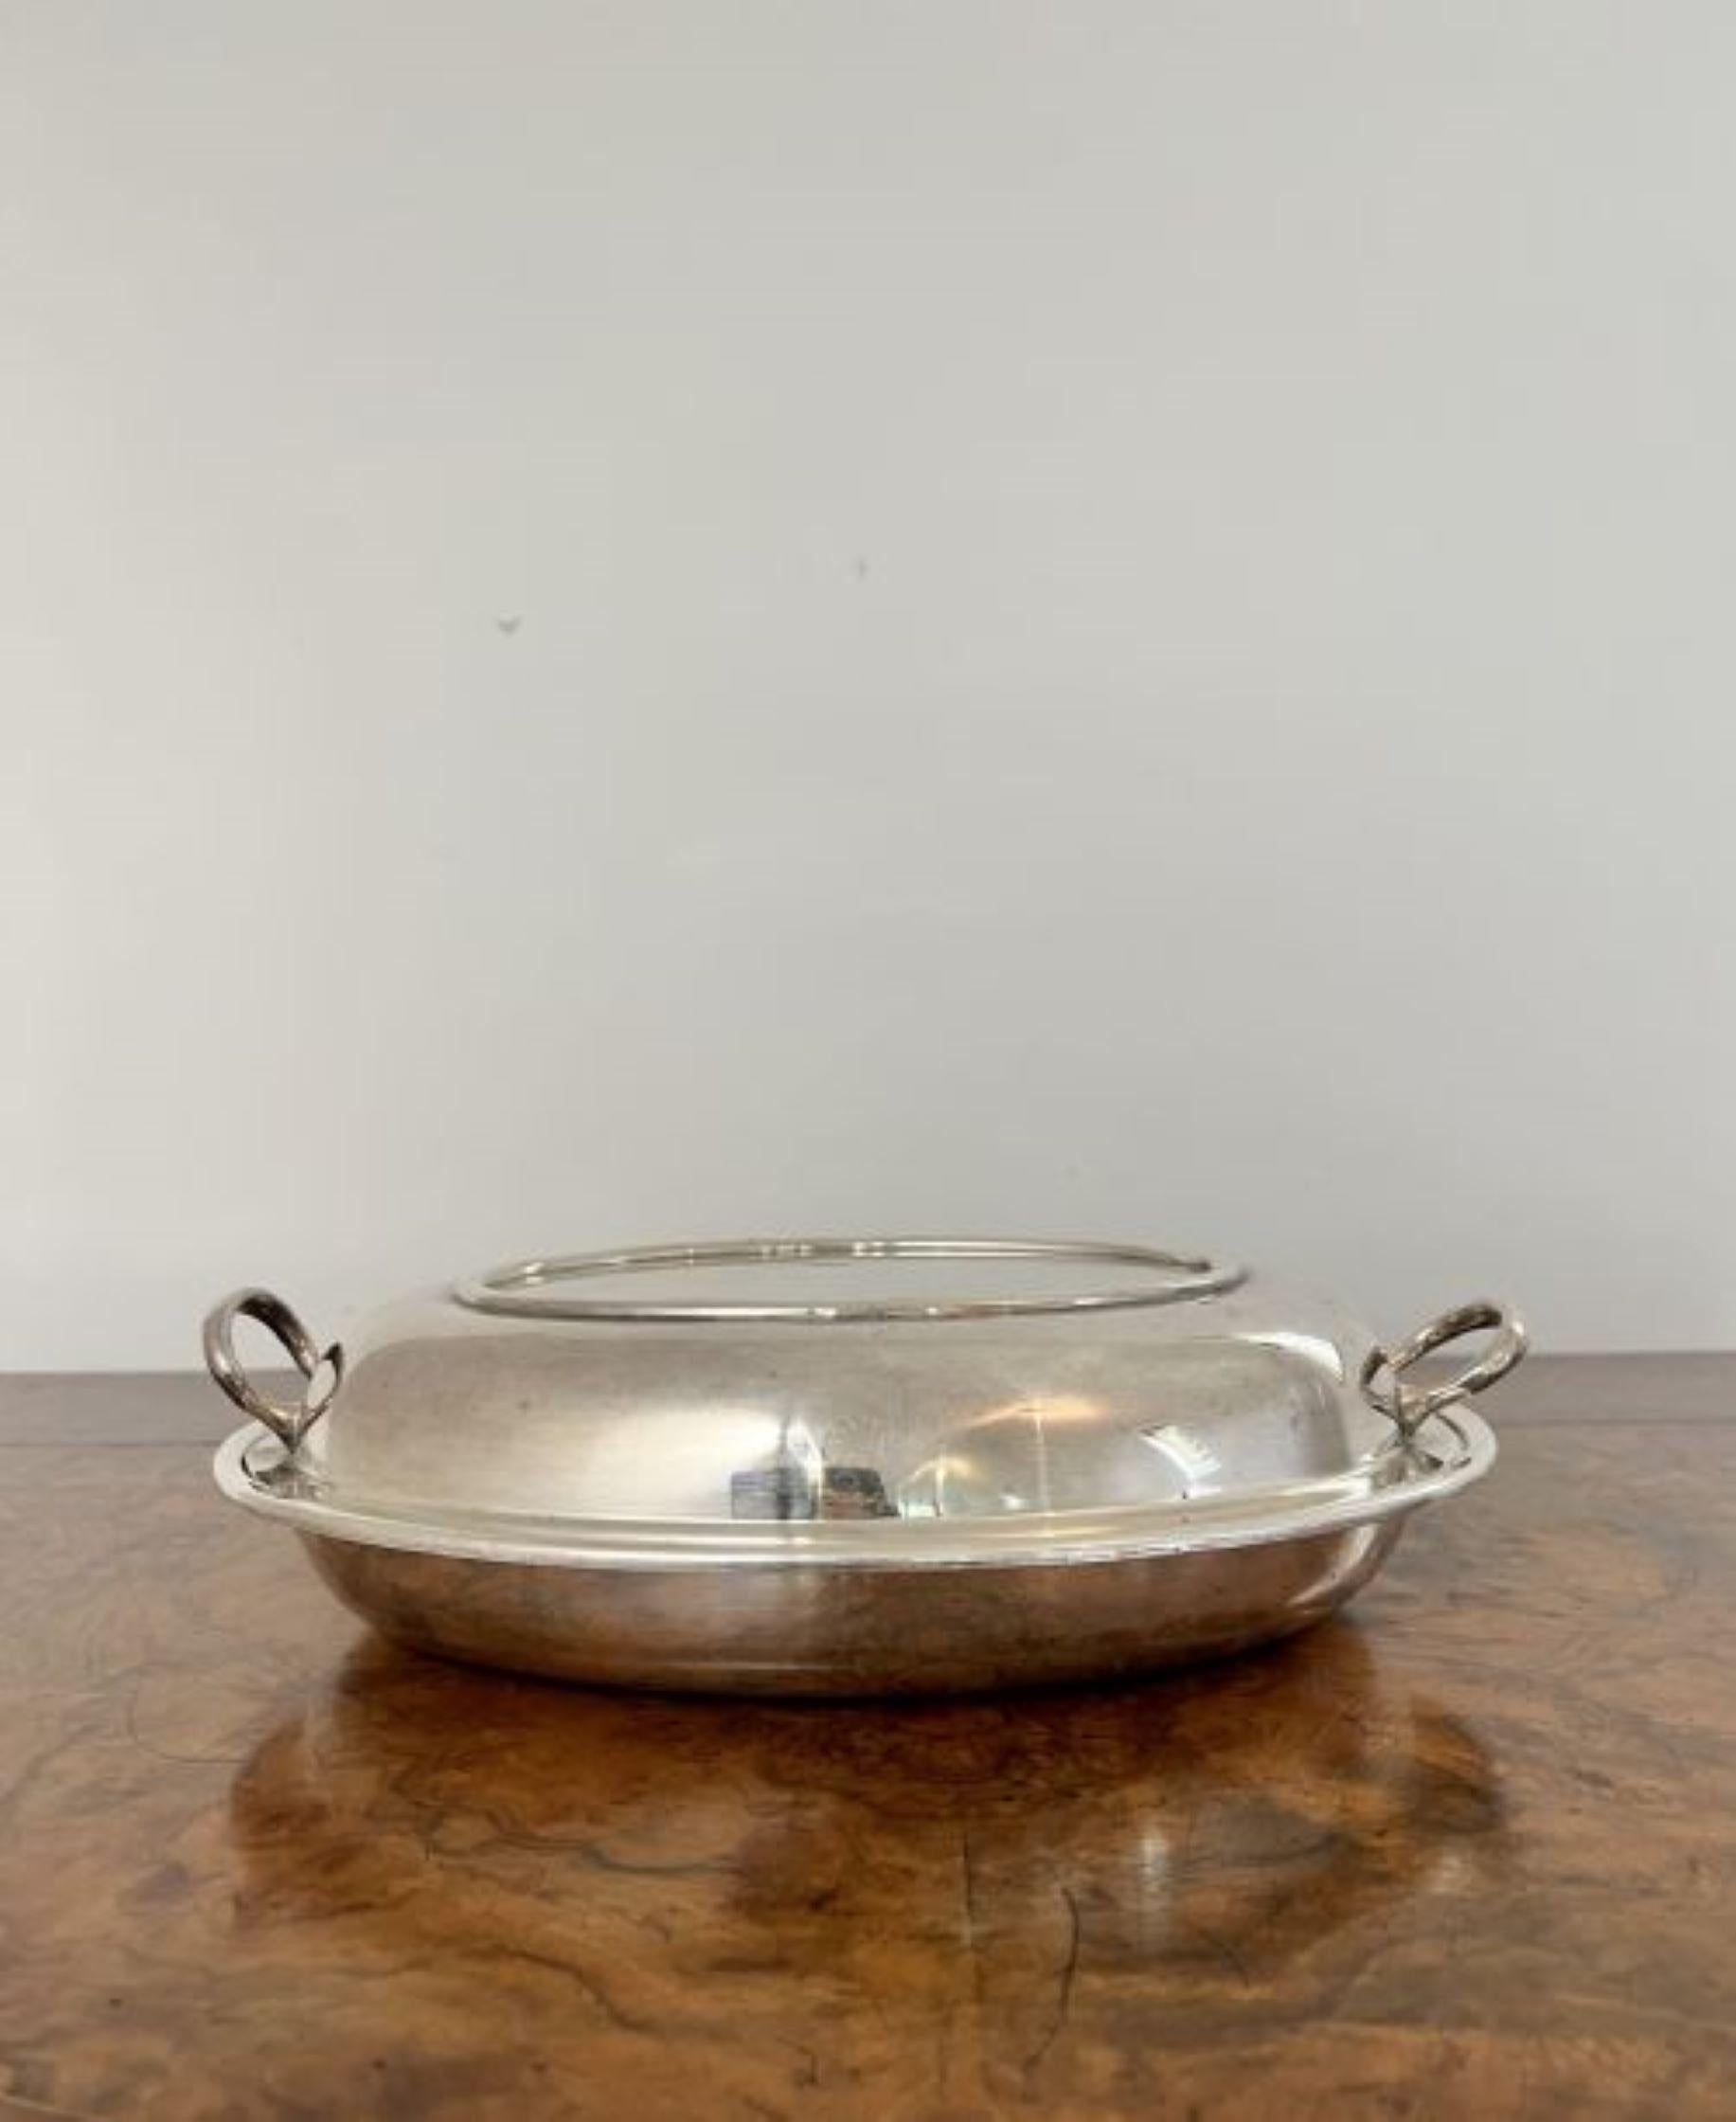 Antique Edwardian silver plated oval entree dish having an antique Edwardian oval shaped entree dish with handles to both sides and a removable lid. 